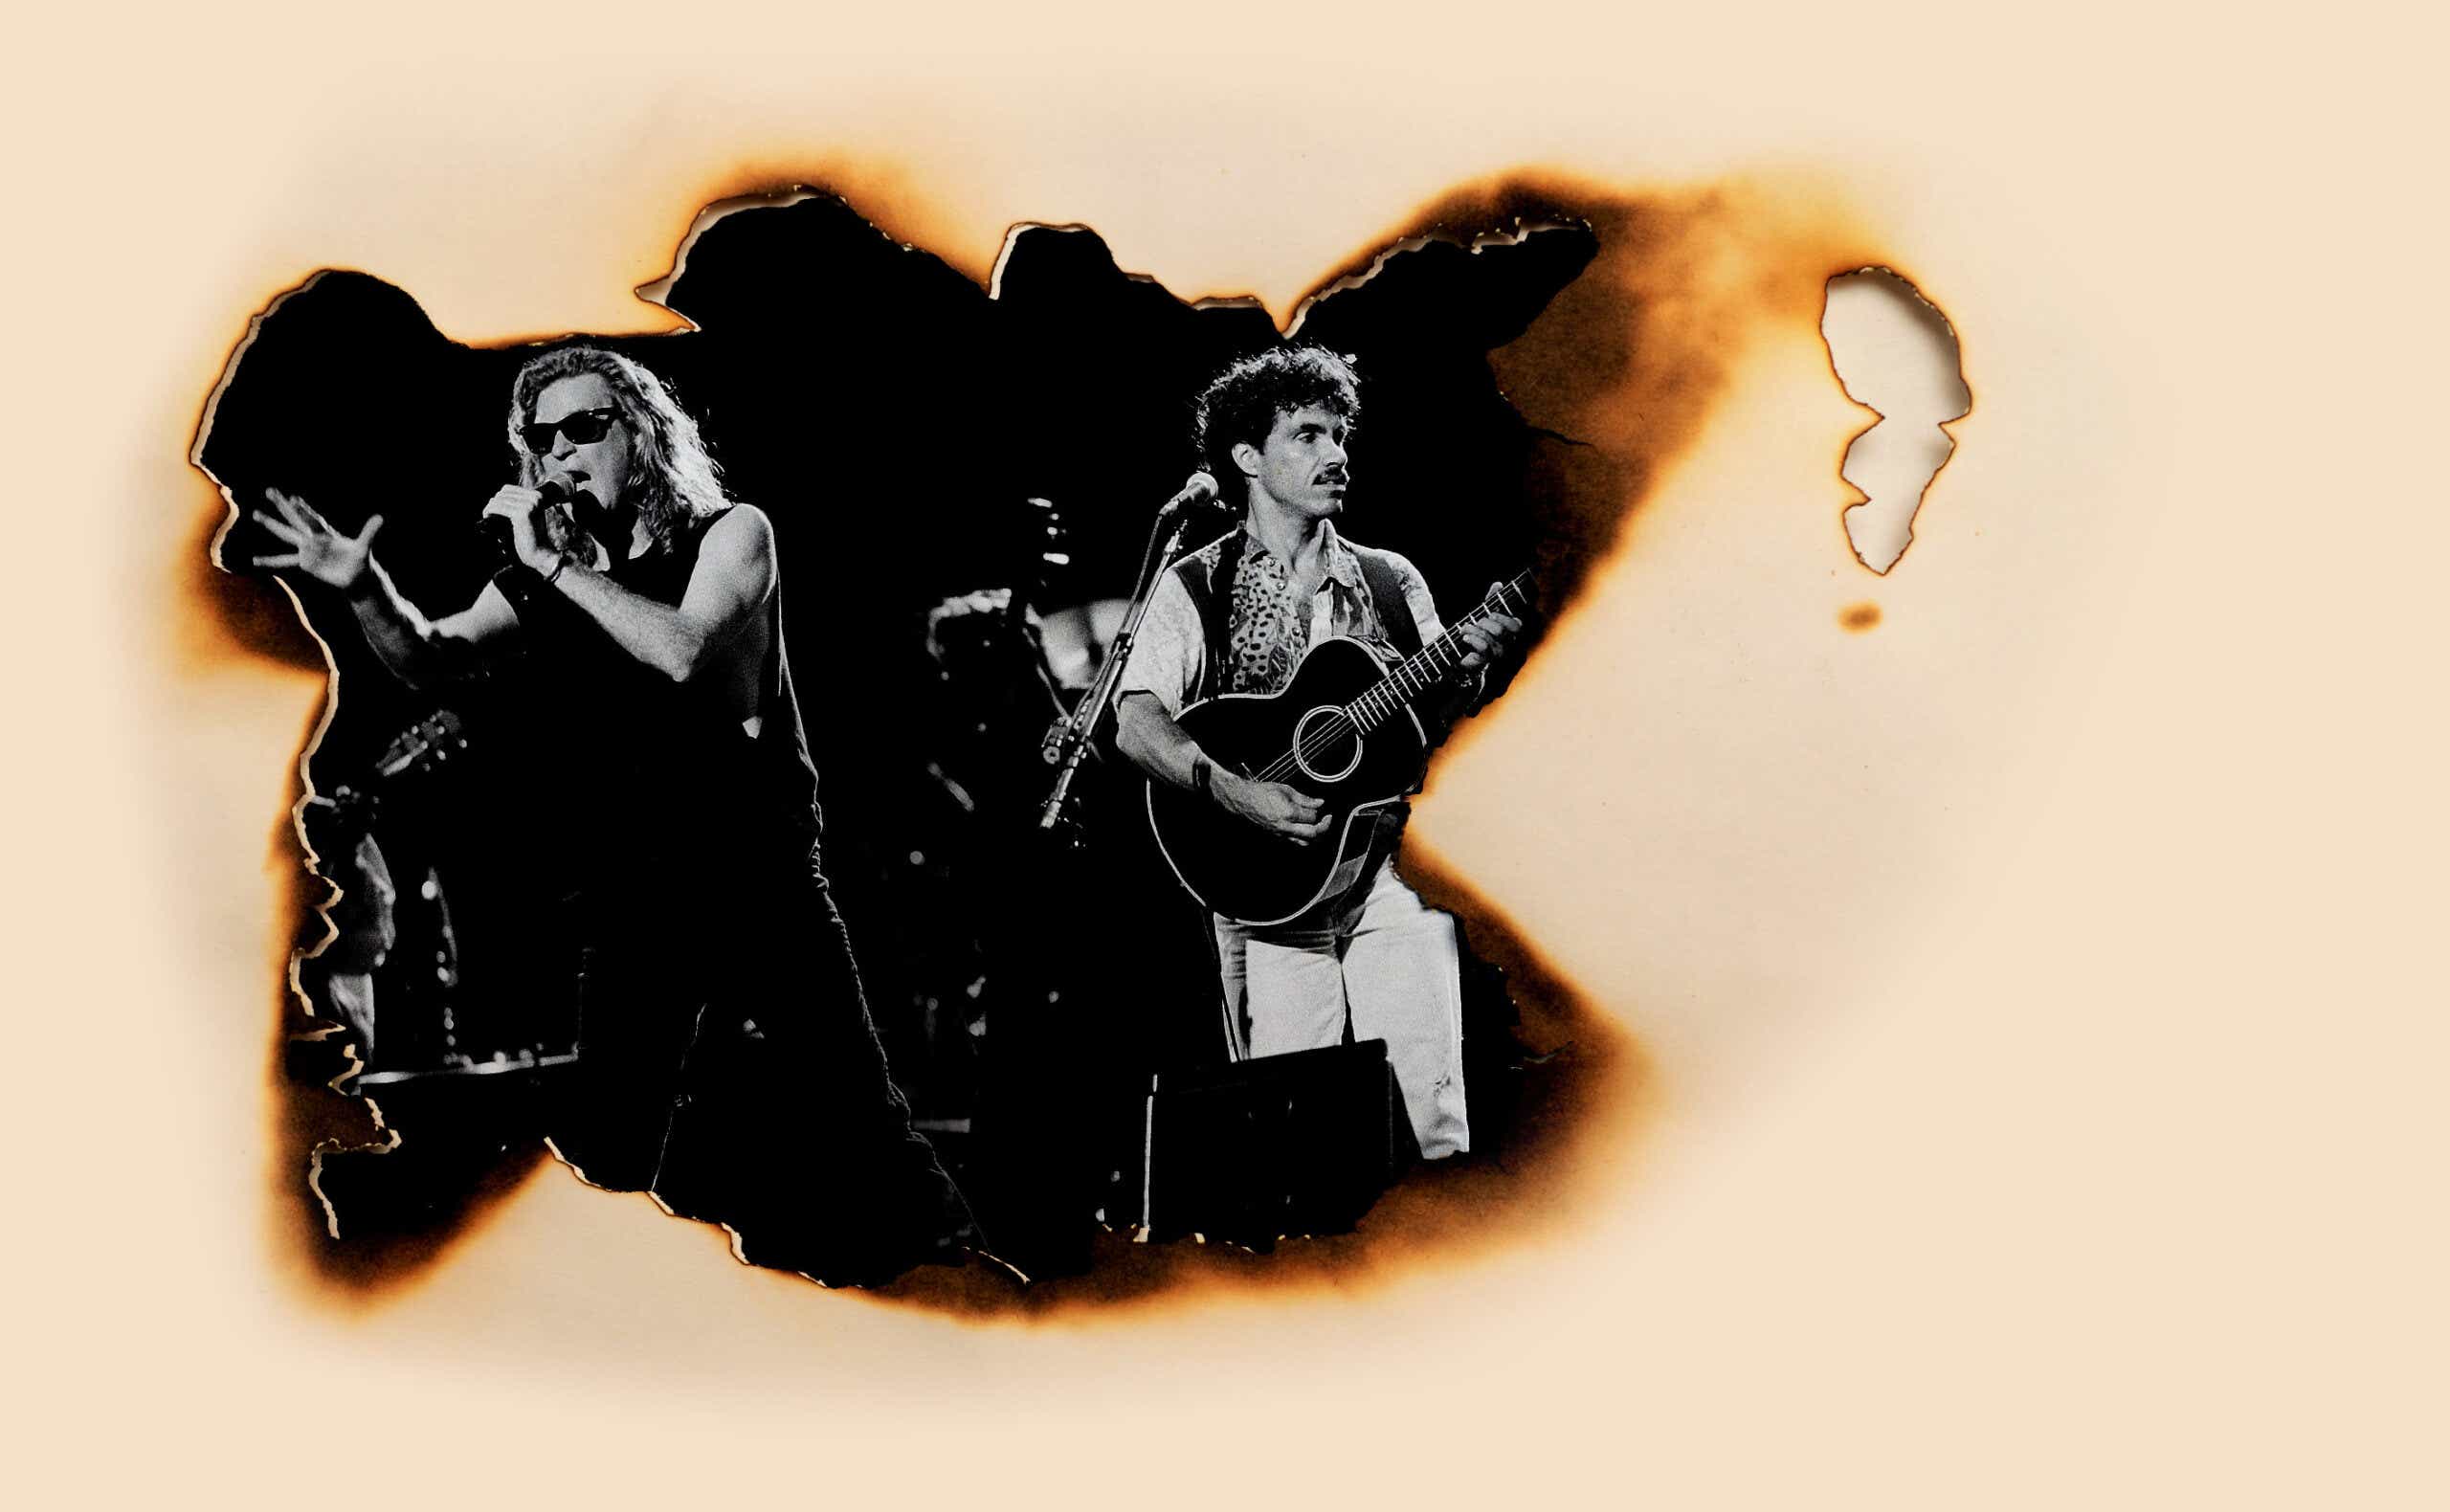 burnt photo of the members of Hall and Oates performing on stage